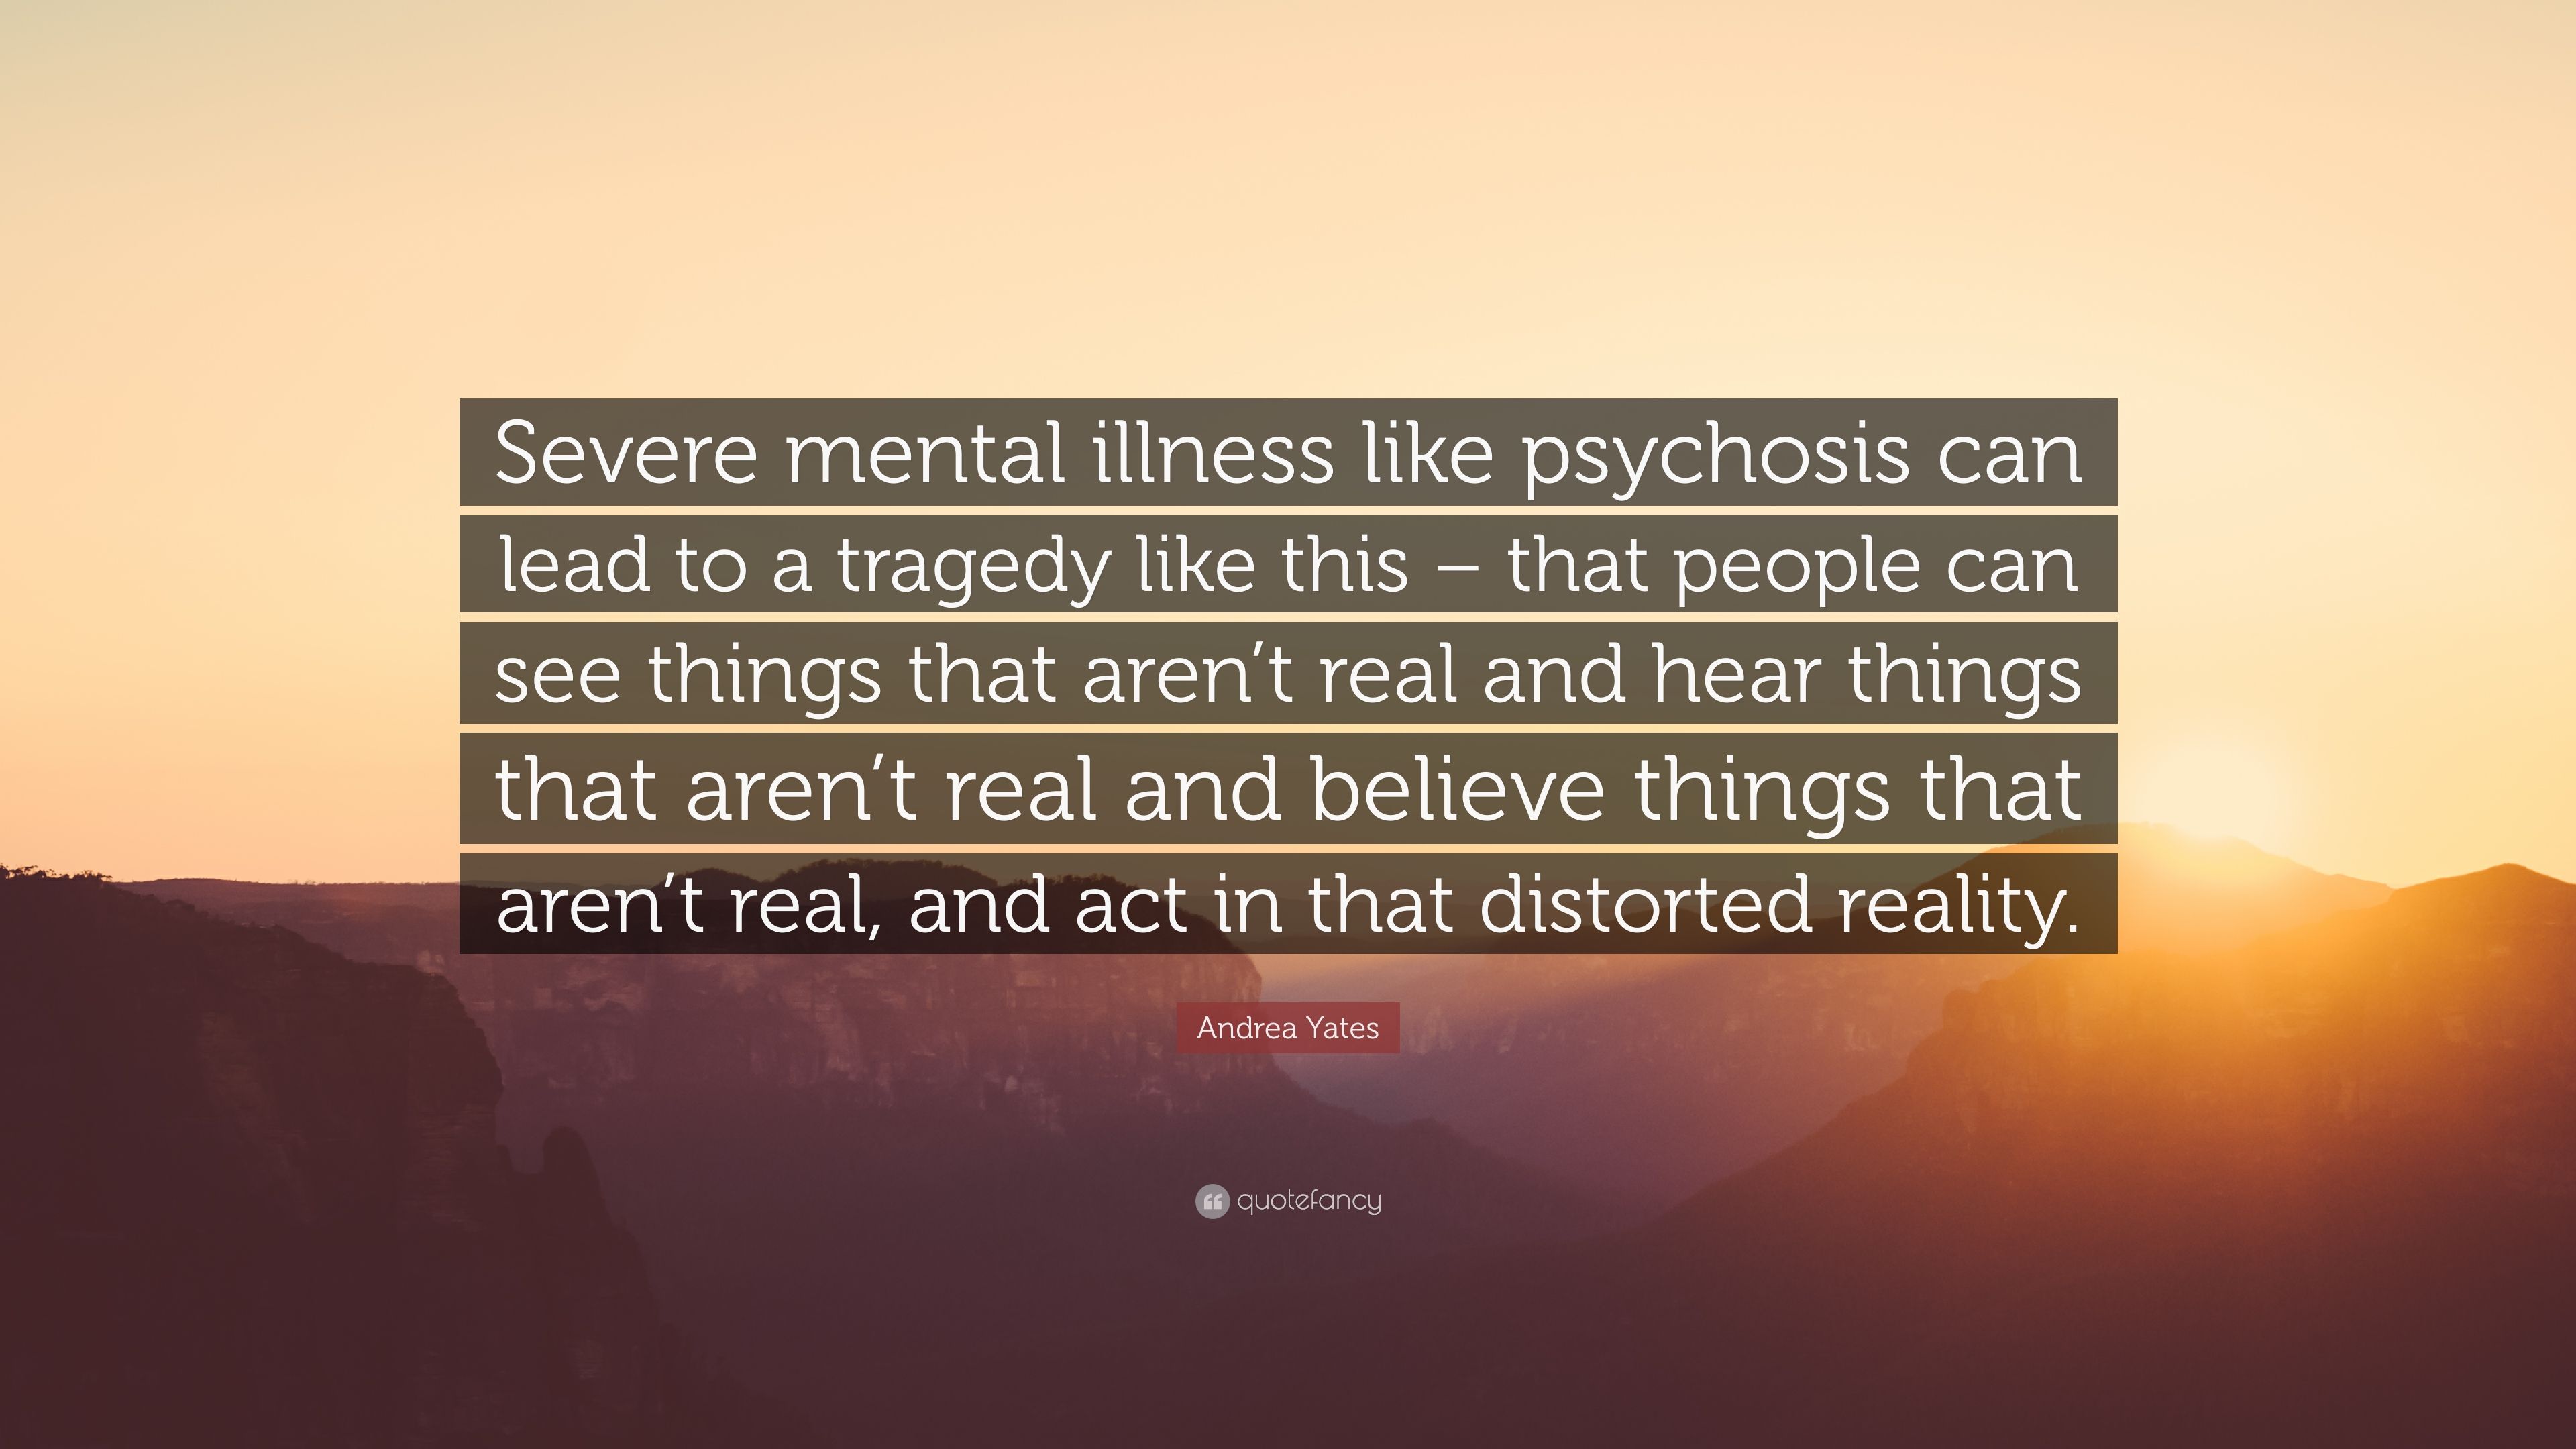 Andrea Yates Quote: “Severe mental illness like psychosis can lead